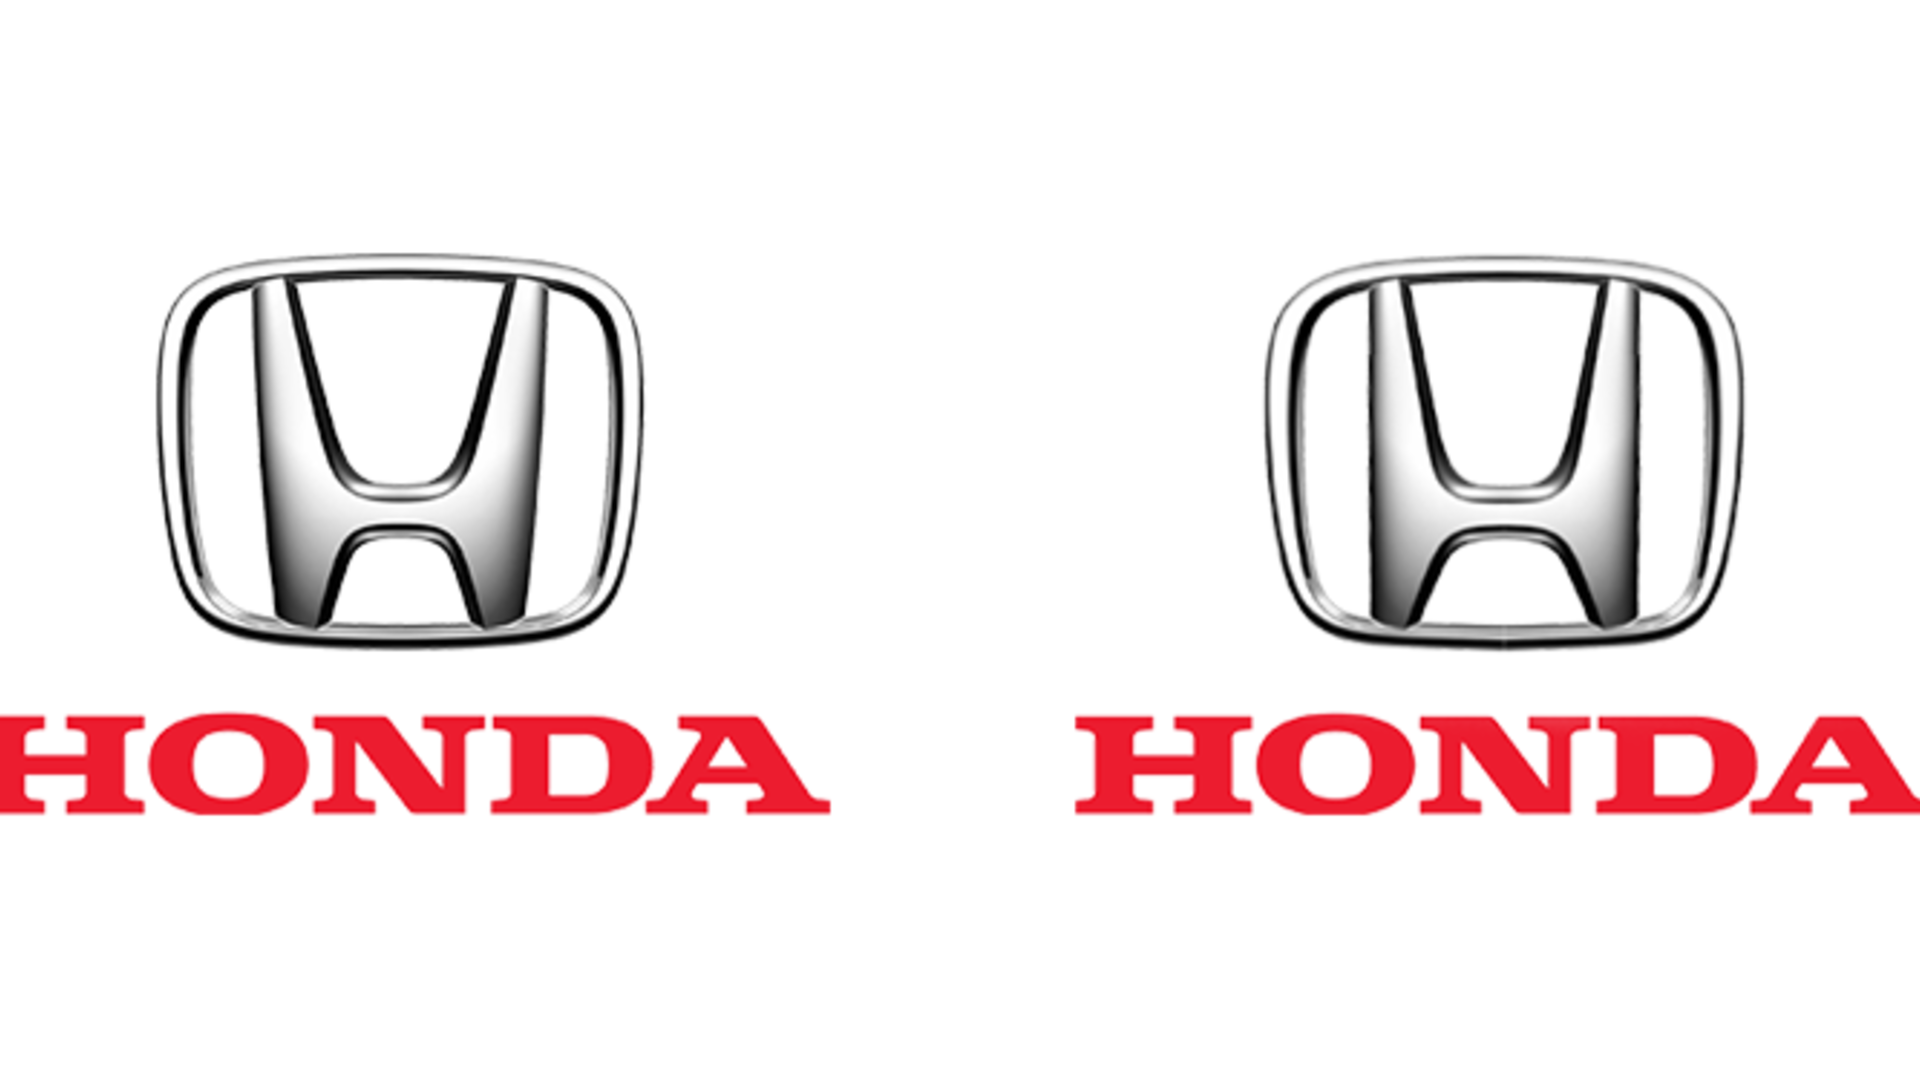 Spot The Difference Test Your Knowledge Of Car Badges